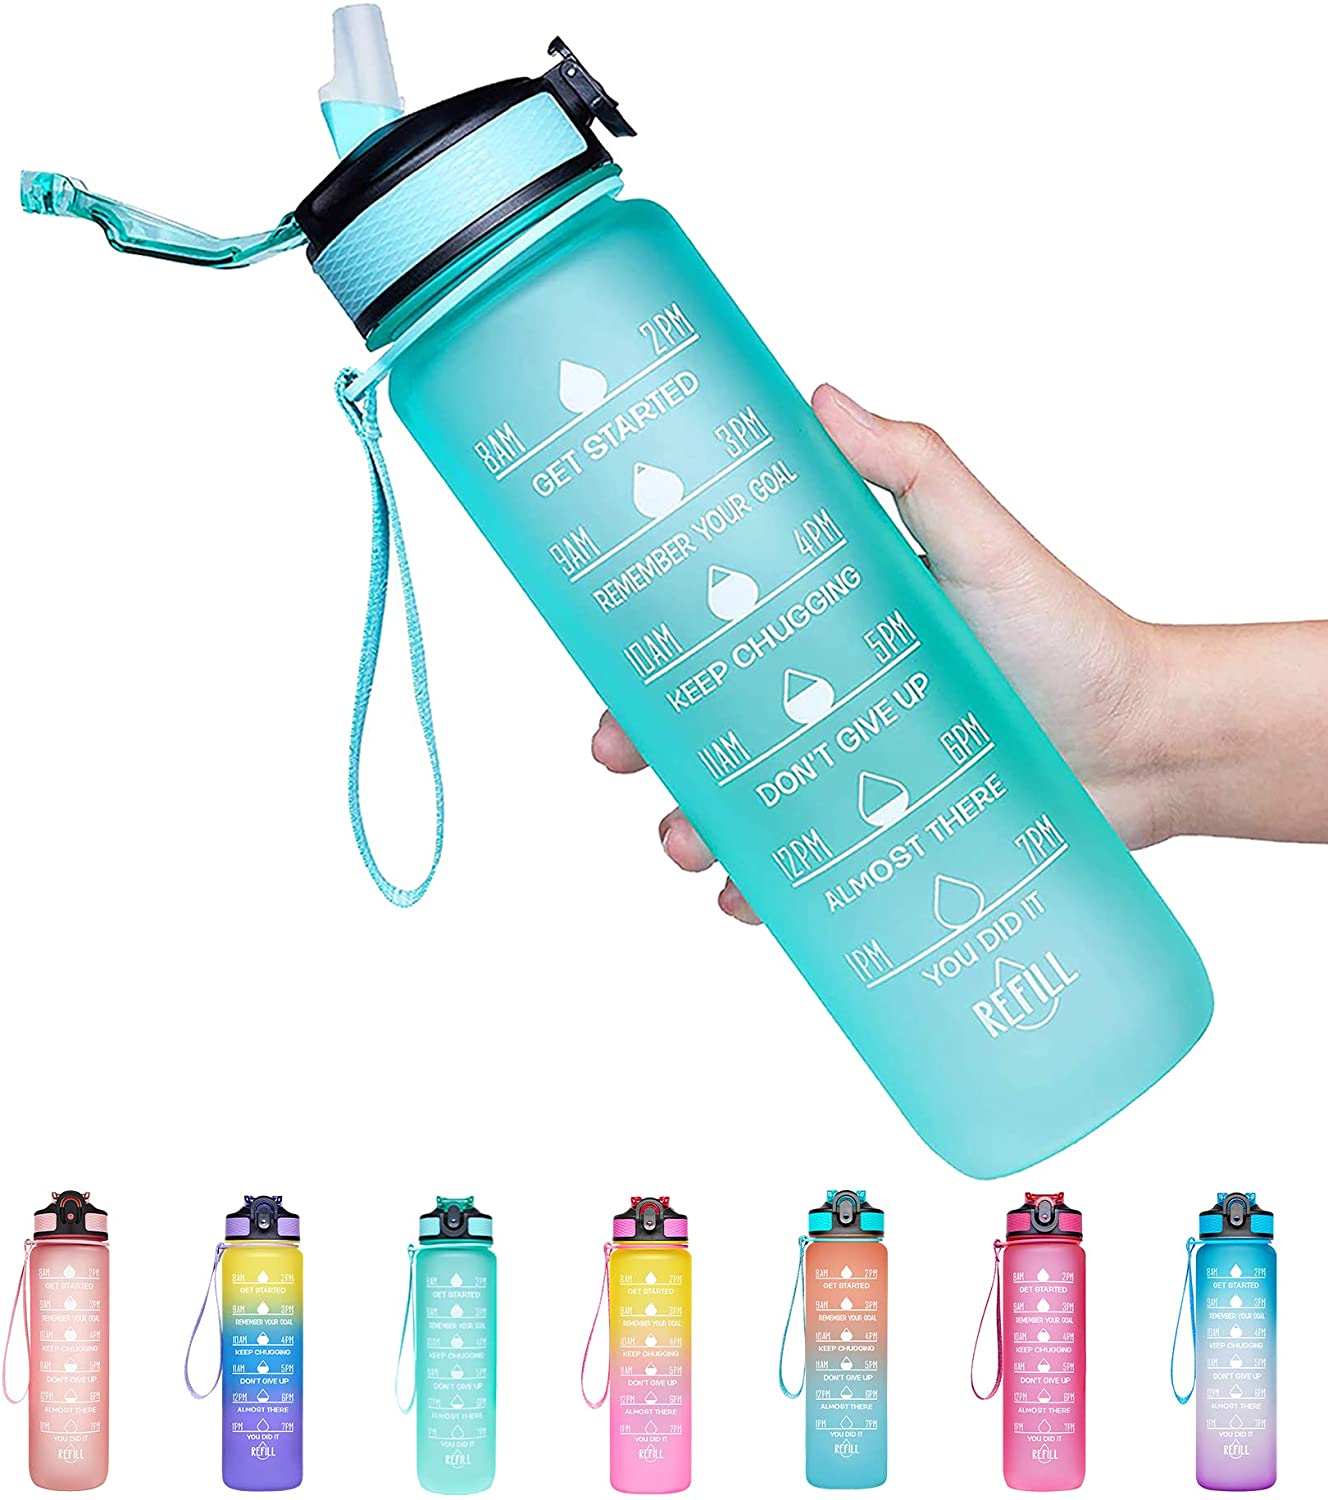 https://video-images.vice.com//products/61e71f4a41fbab009c045548/gallery-image/1642536780110-giotto-water-bottle.jpeg